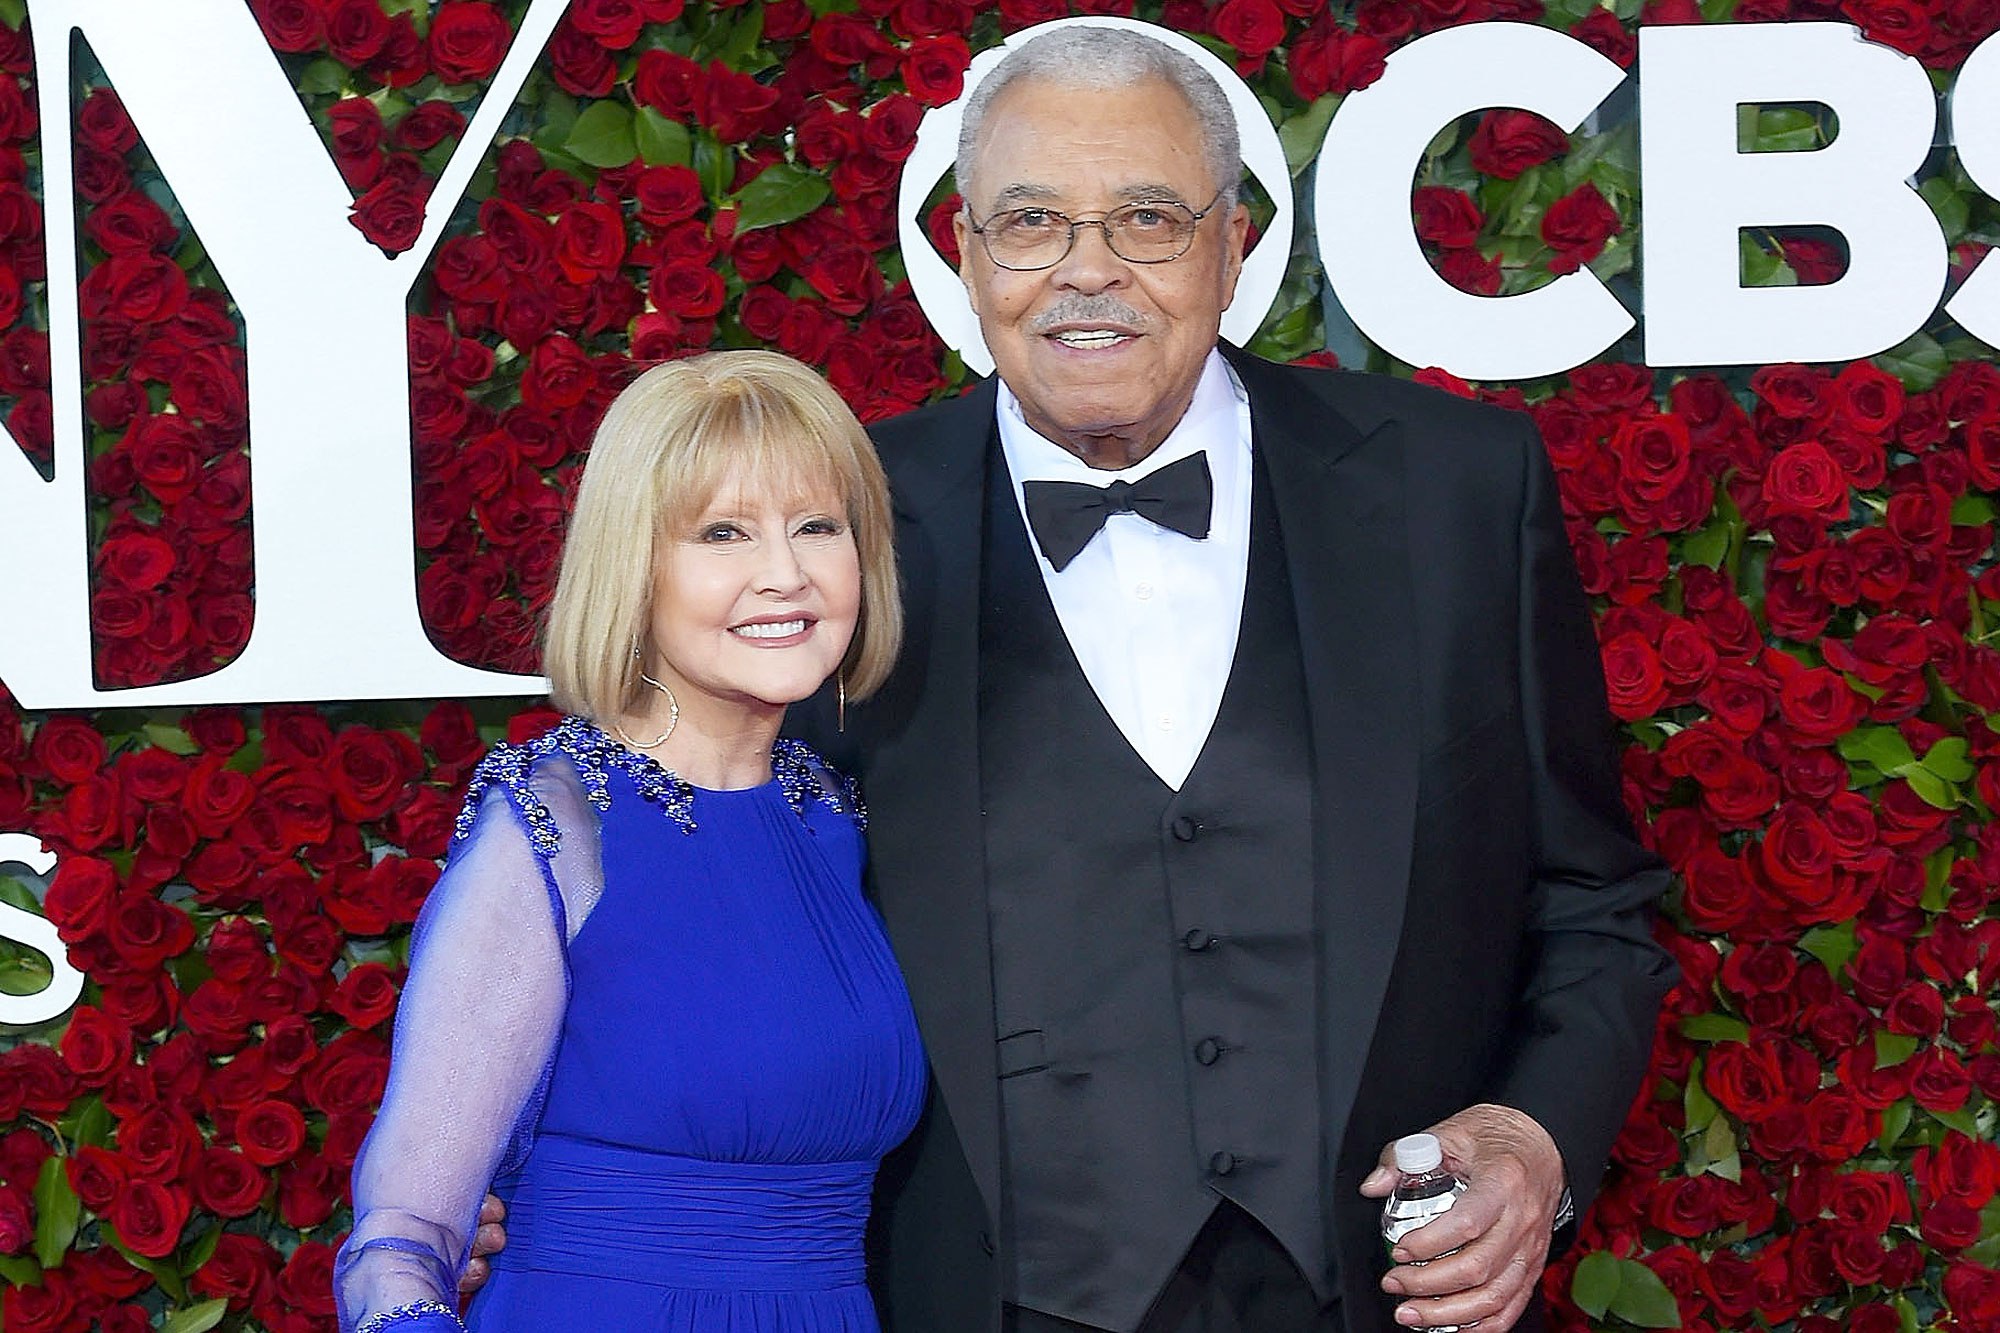 NEW YORK, NY - JUNE 12: Actors Cecilia Hart (L) and James Earl Jones attend the 70th Annual Tony Awards at The Beacon Theatre on June 12, 2016 in New York City. (Photo by Ben Gabbe/Getty Images)